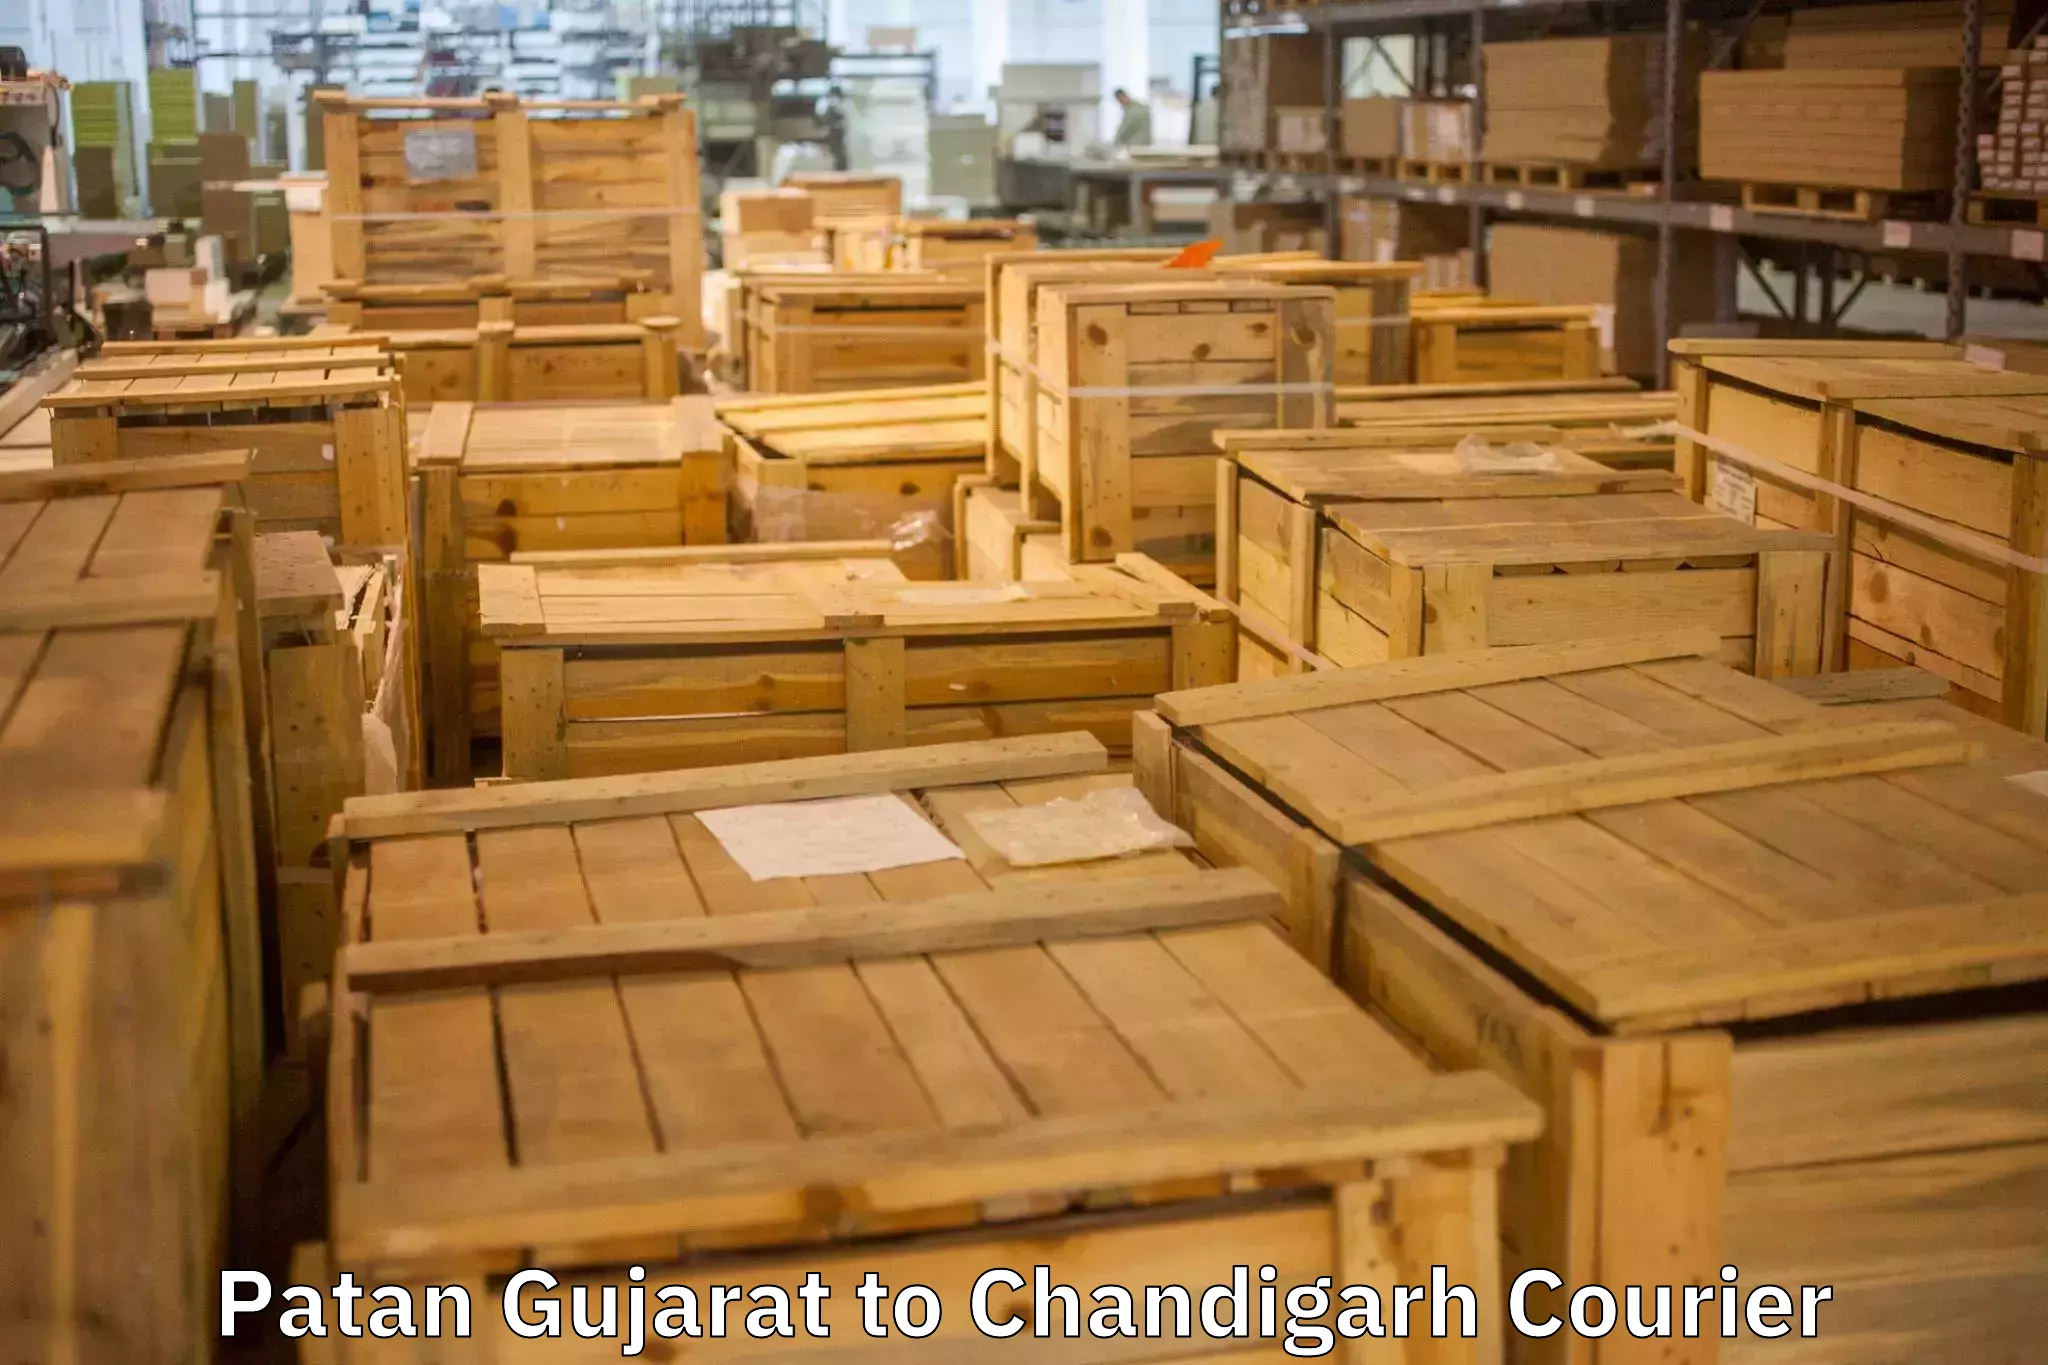 Dependable moving services Patan Gujarat to Chandigarh